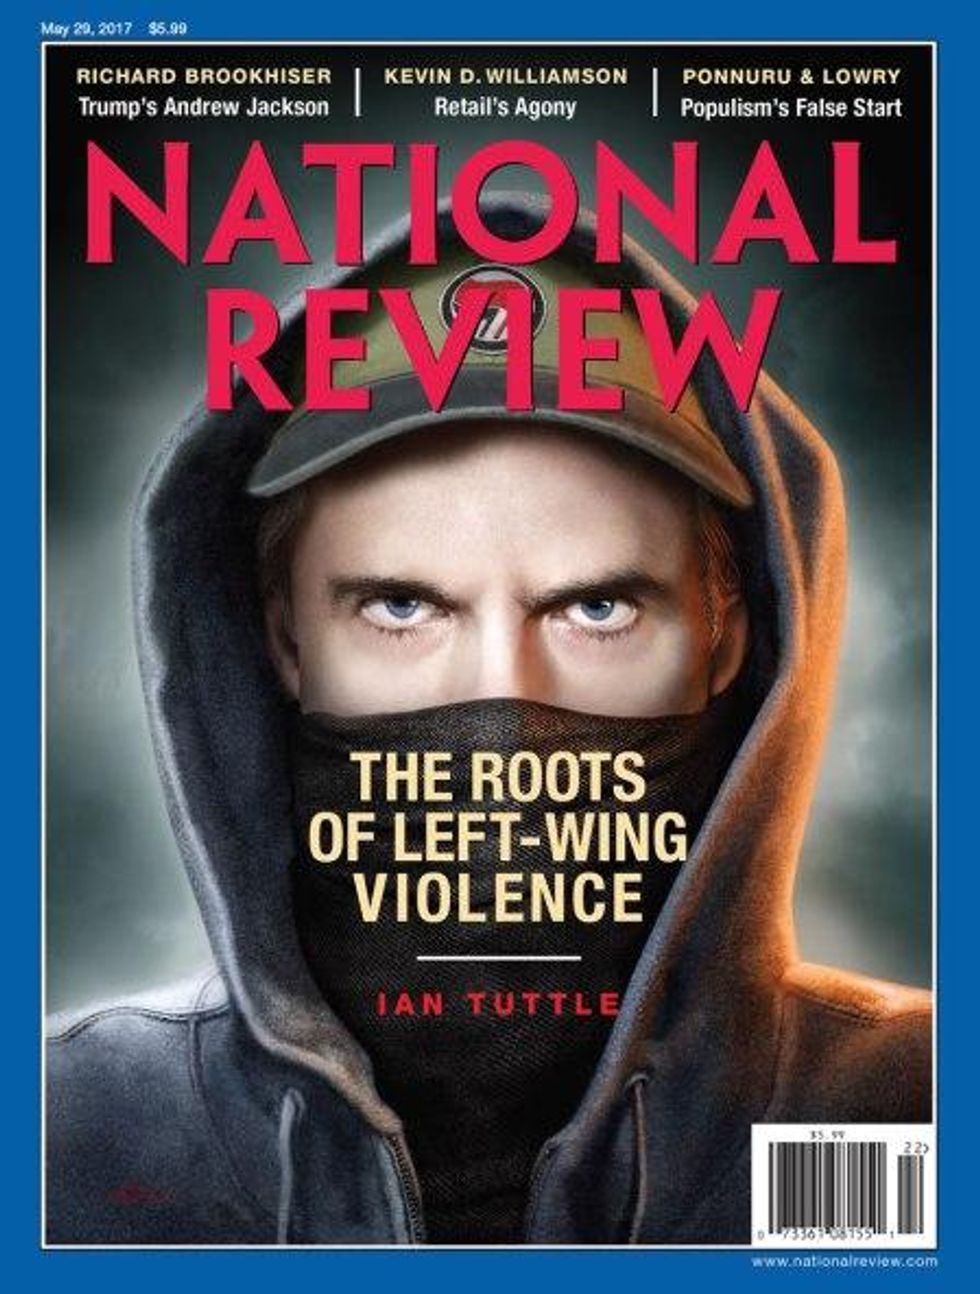 National Review: The Roots of Left-Wing Violence